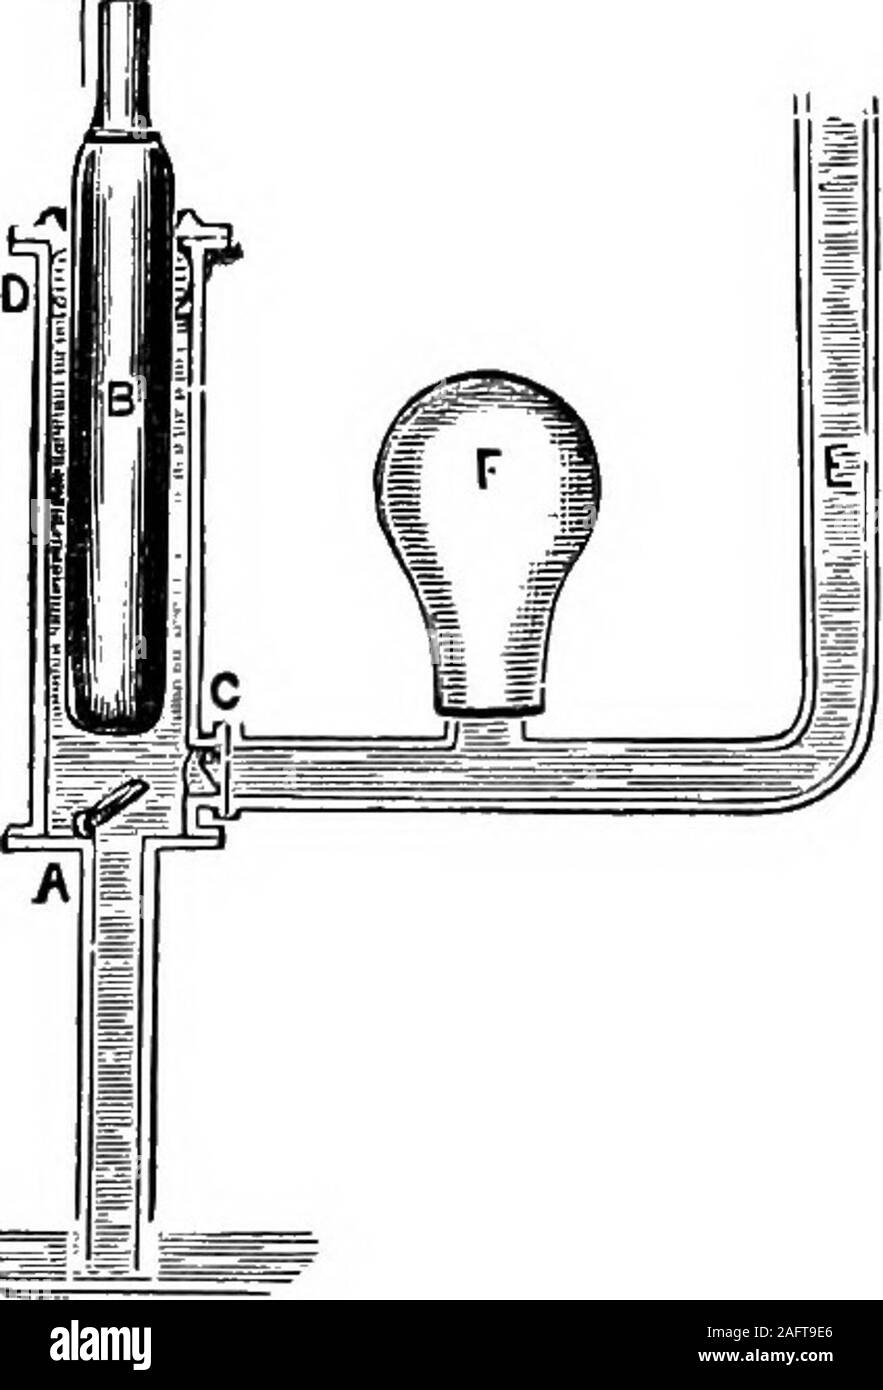 . The principles of physics. d cylinder of metal, B (Fig. 147), called the plunger. This passes through a stuifing boxD, in which it fits air-tight. Valvesopening upward and outward areplaced at A and C respectively.When the plunger is raised, Aopens and C closes, and water israised into the barrel by atmos-pheric pressure. When the plungerdescends, A closes and C opens, andthe water is forced up through thepipe E to a hight dependent on thepressure brought to bear upon itthrough the plunger. An air-domeF is usually connected with thesepumps to regulate the pressure soas to give through the de Stock Photo